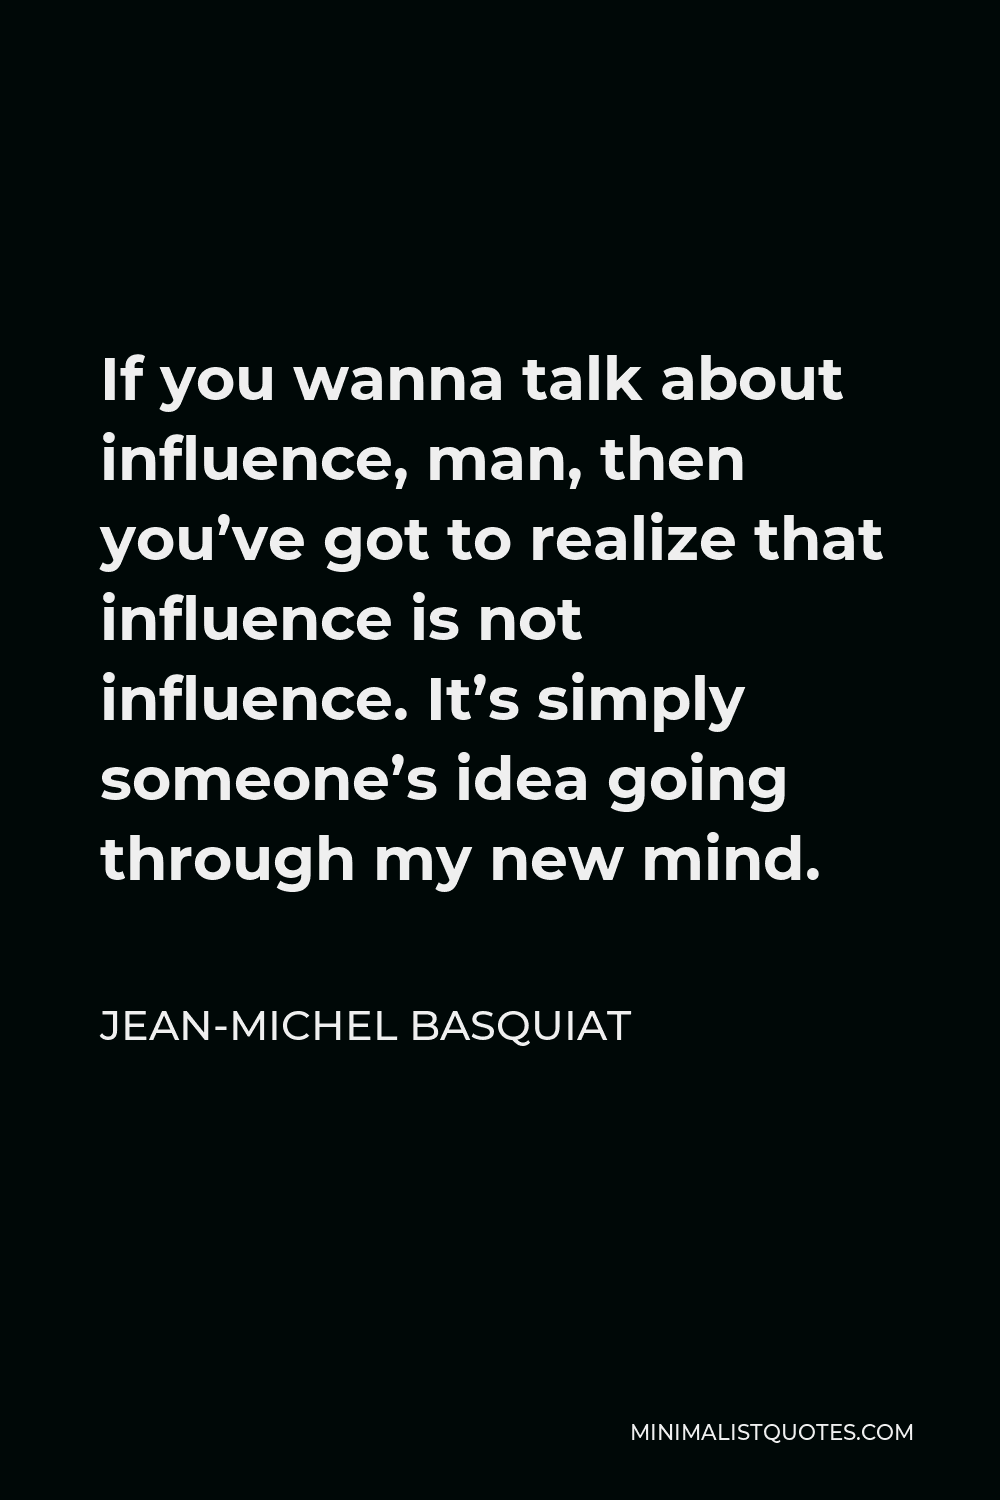 Jean-Michel Basquiat Quote - If you wanna talk about influence, man, then you’ve got to realize that influence is not influence. It’s simply someone’s idea going through my new mind.